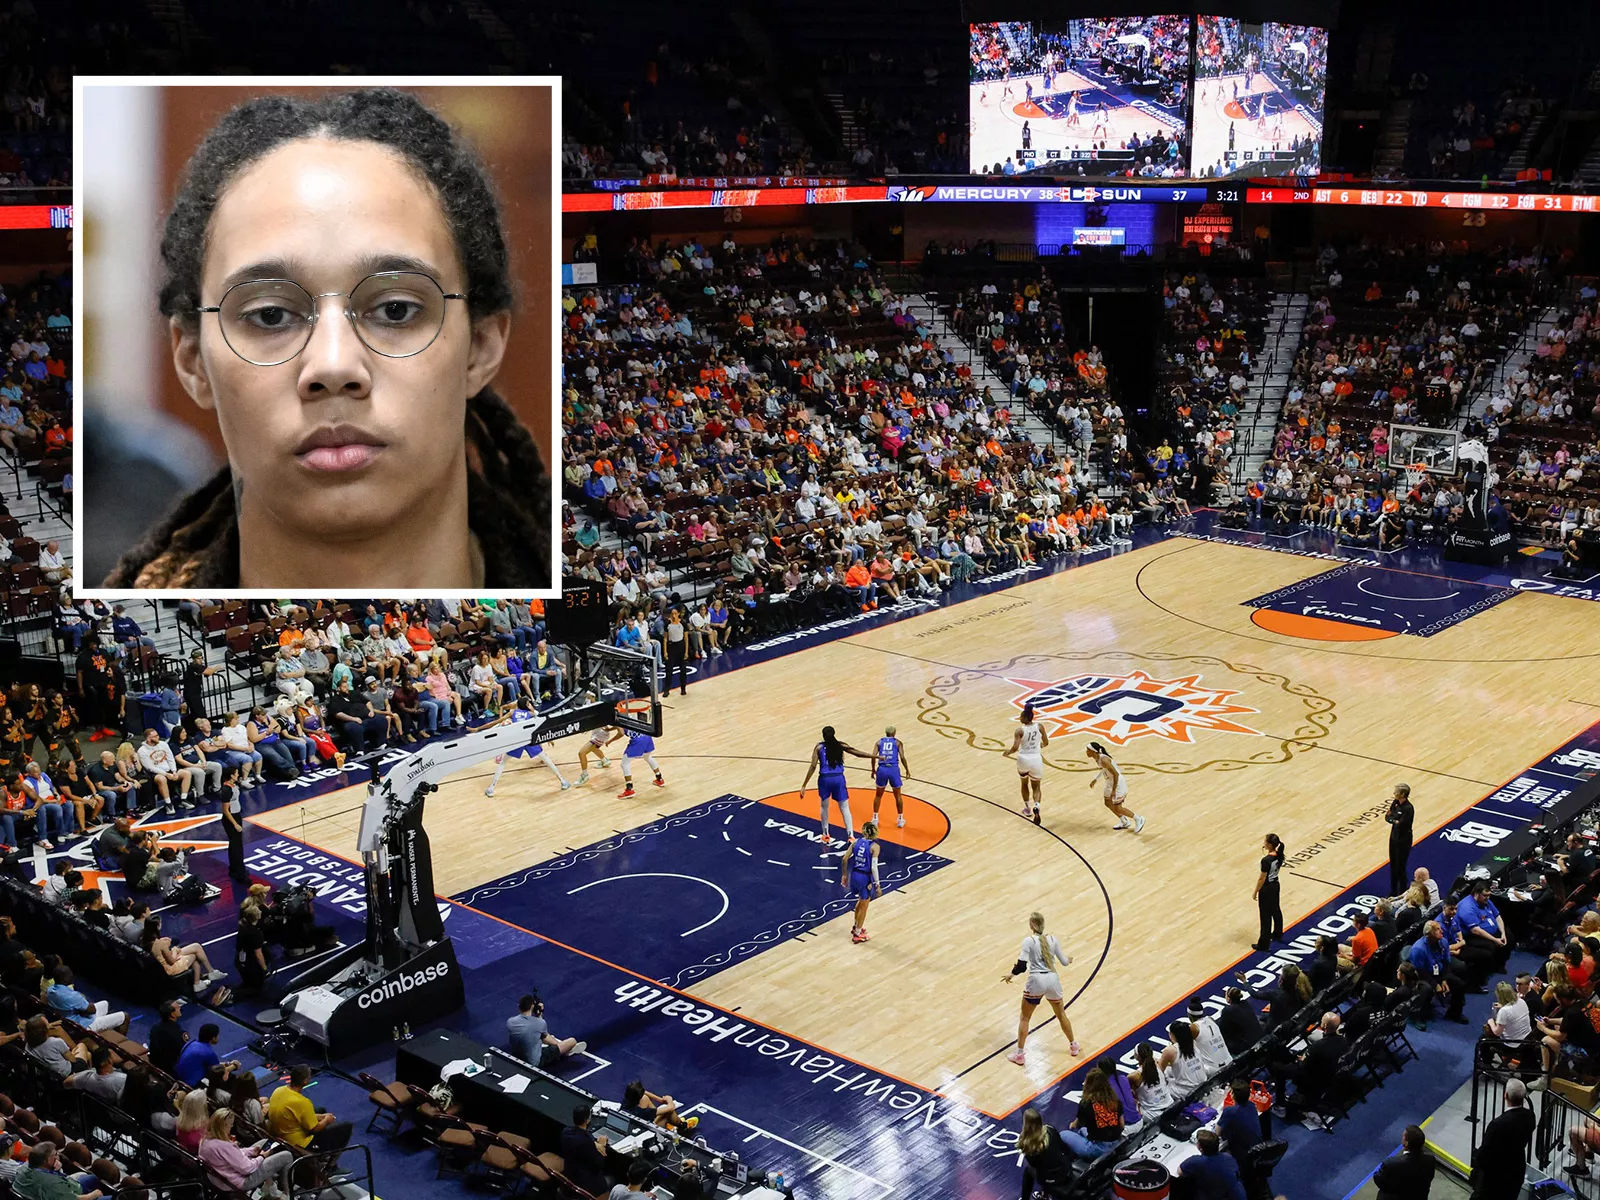 Brittney Griner finally comes home: Biggest WNBA stories of 2022